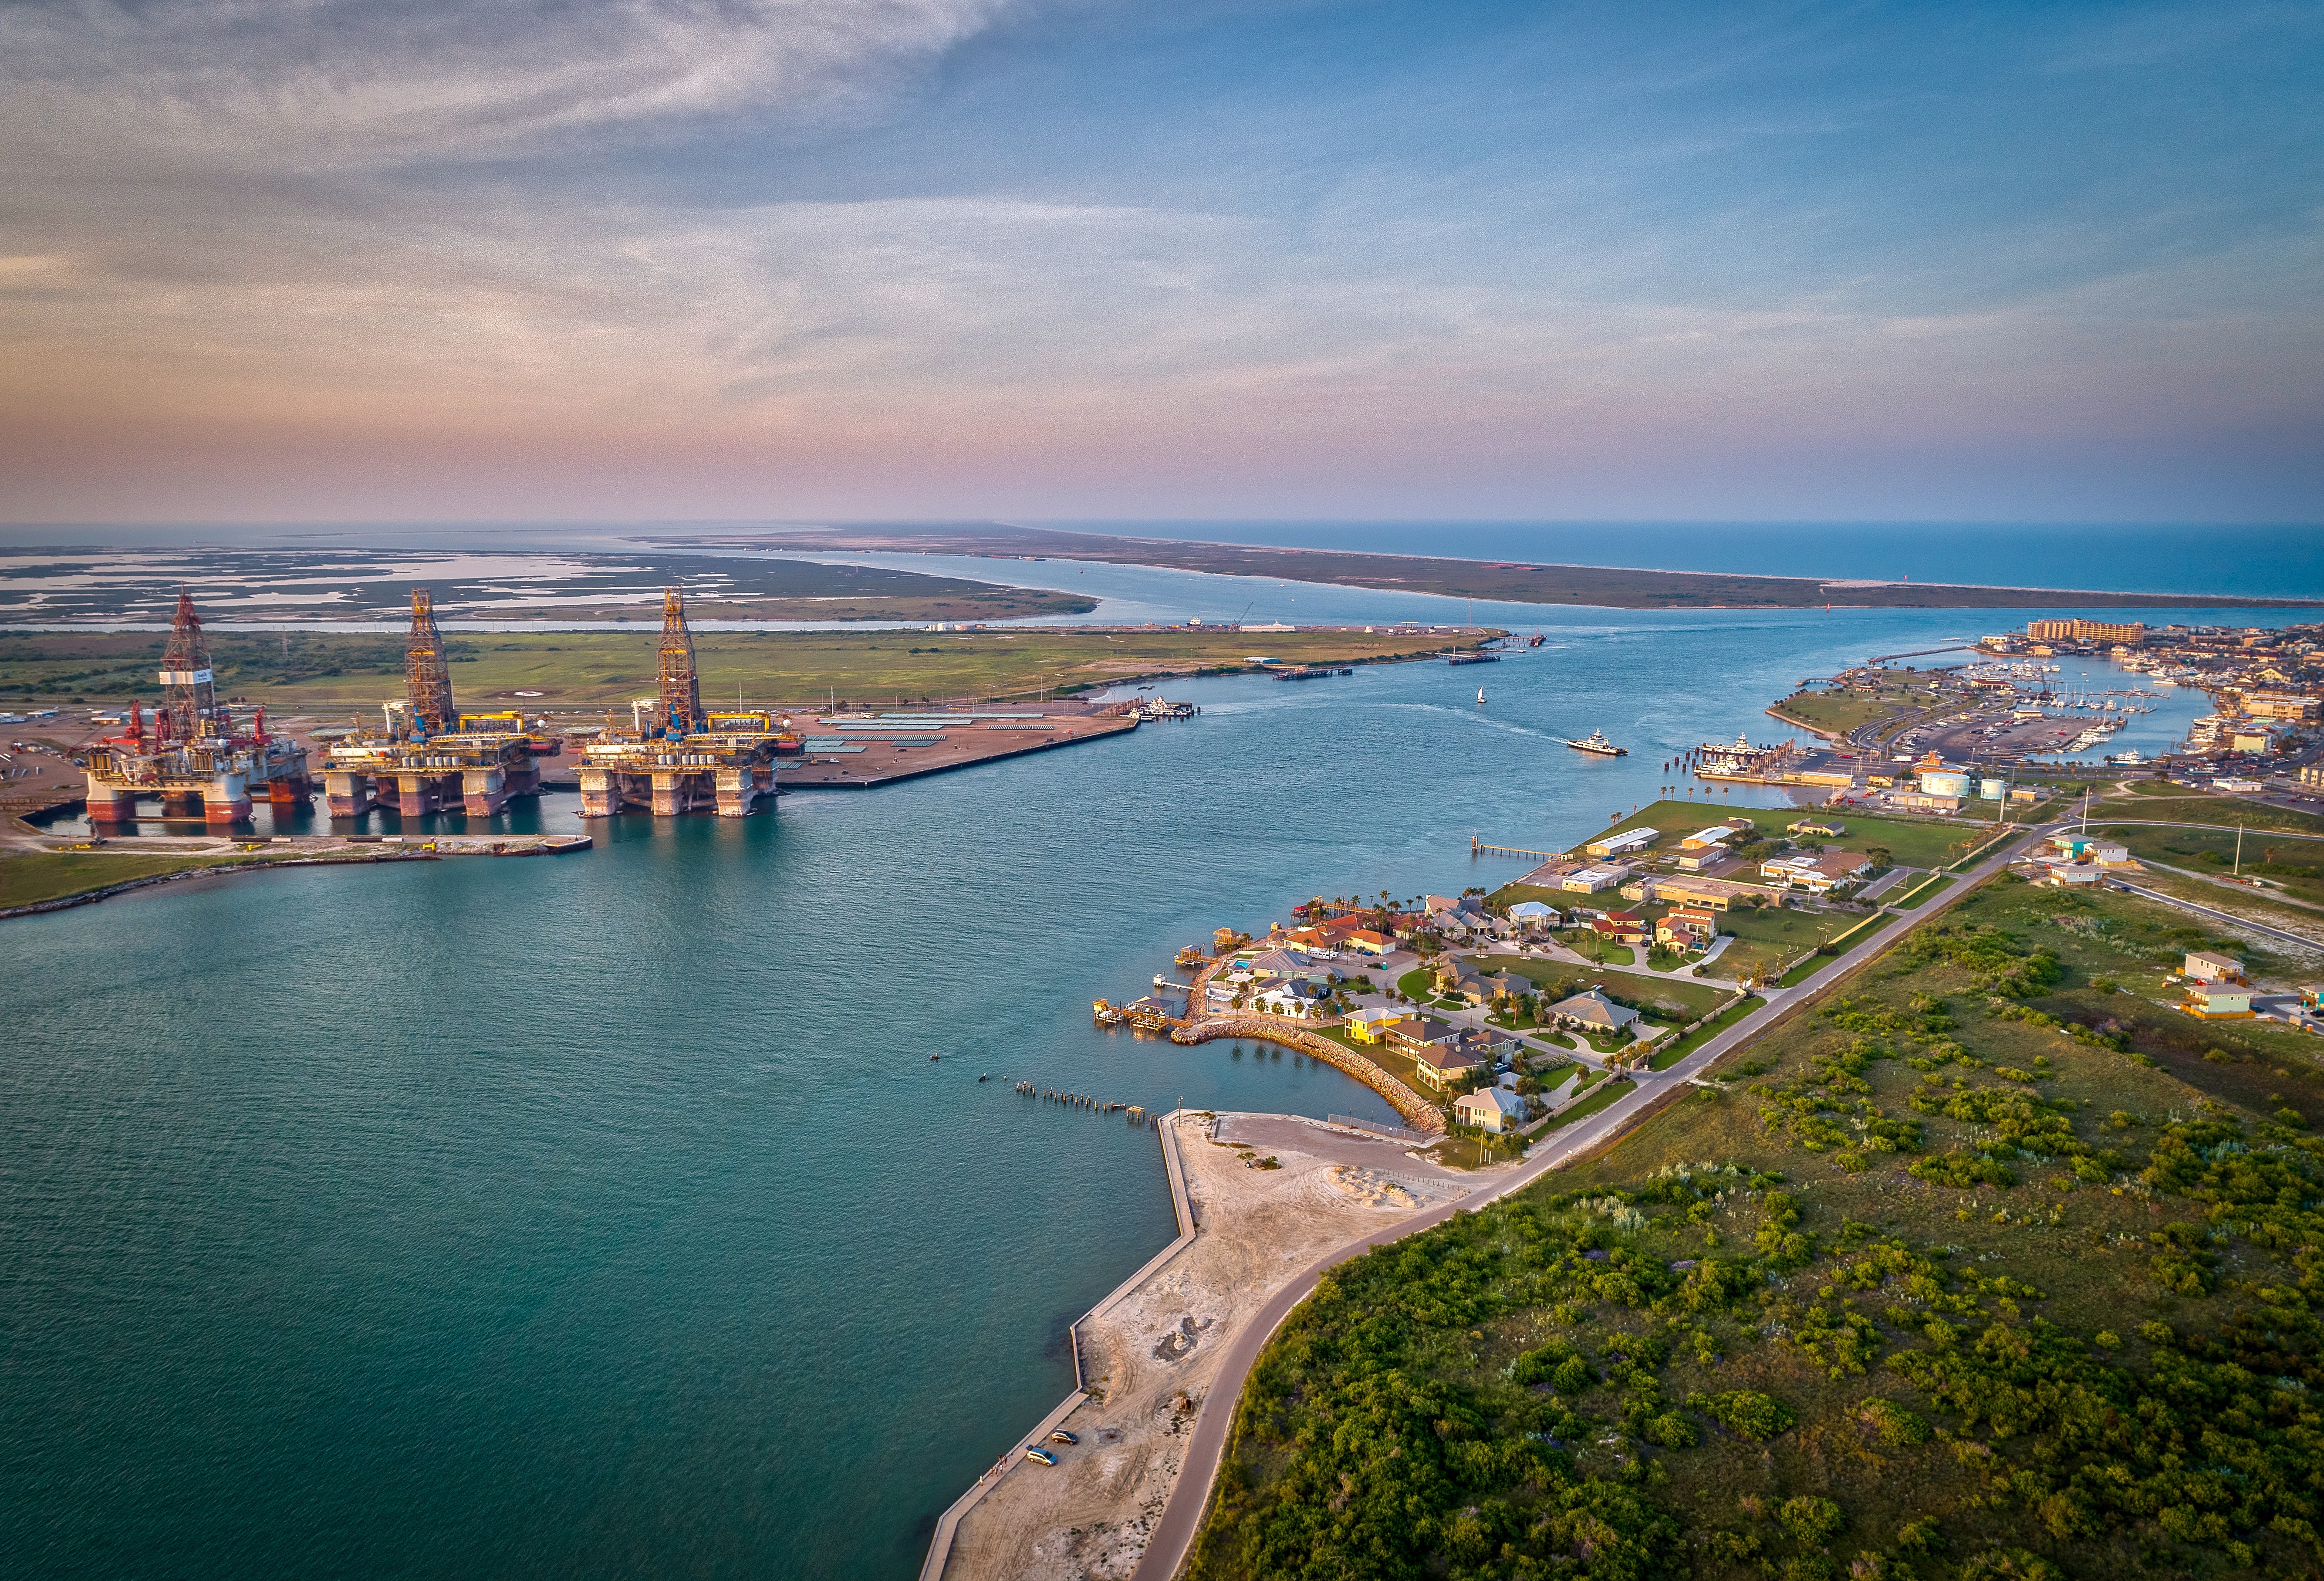 The natural inlet and ship channel splits San José Island and Mustang Island, near the Port Aransas Ferry crossing. Credit: Adobe Stock image.